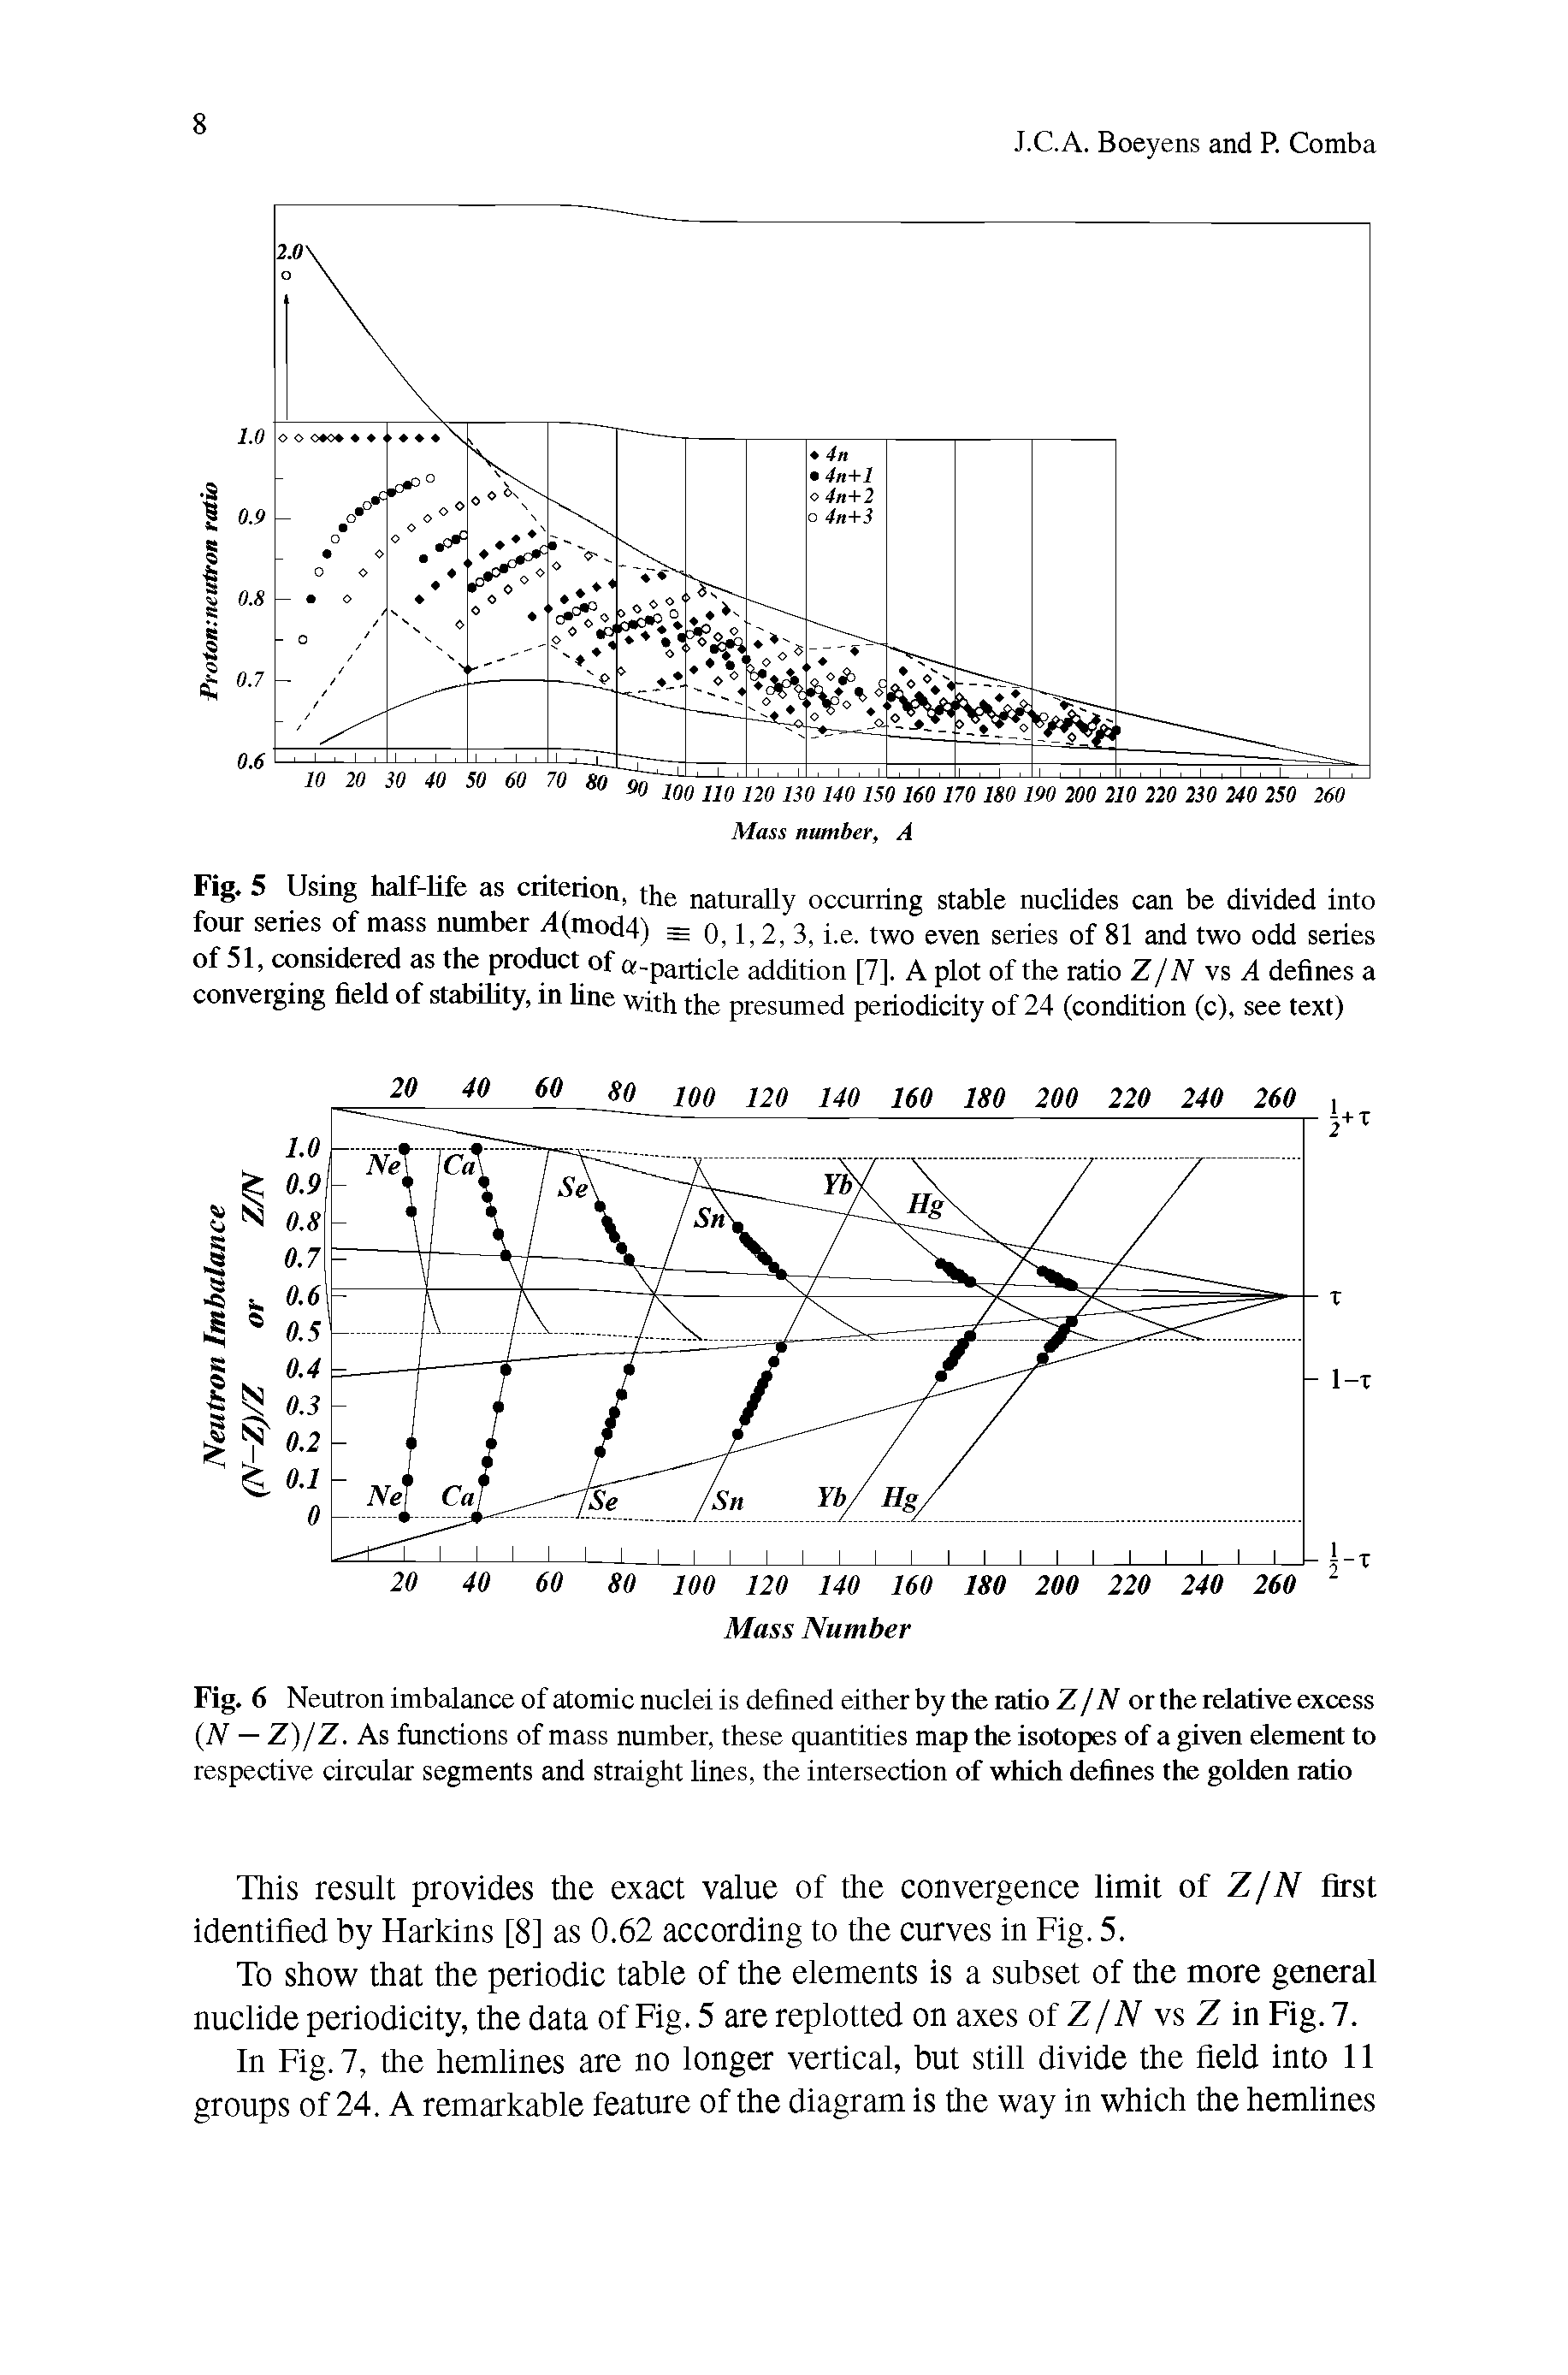 Fig. 6 Neutron imbalance of atomic nuclei is defined either by the ratio Z/iV or the relative excess (N — Z)/Z. As functions of mass number, these quantities map the isotopes of a given element to respective circular segments and straight lines, the intersection of which defines the golden ratio...